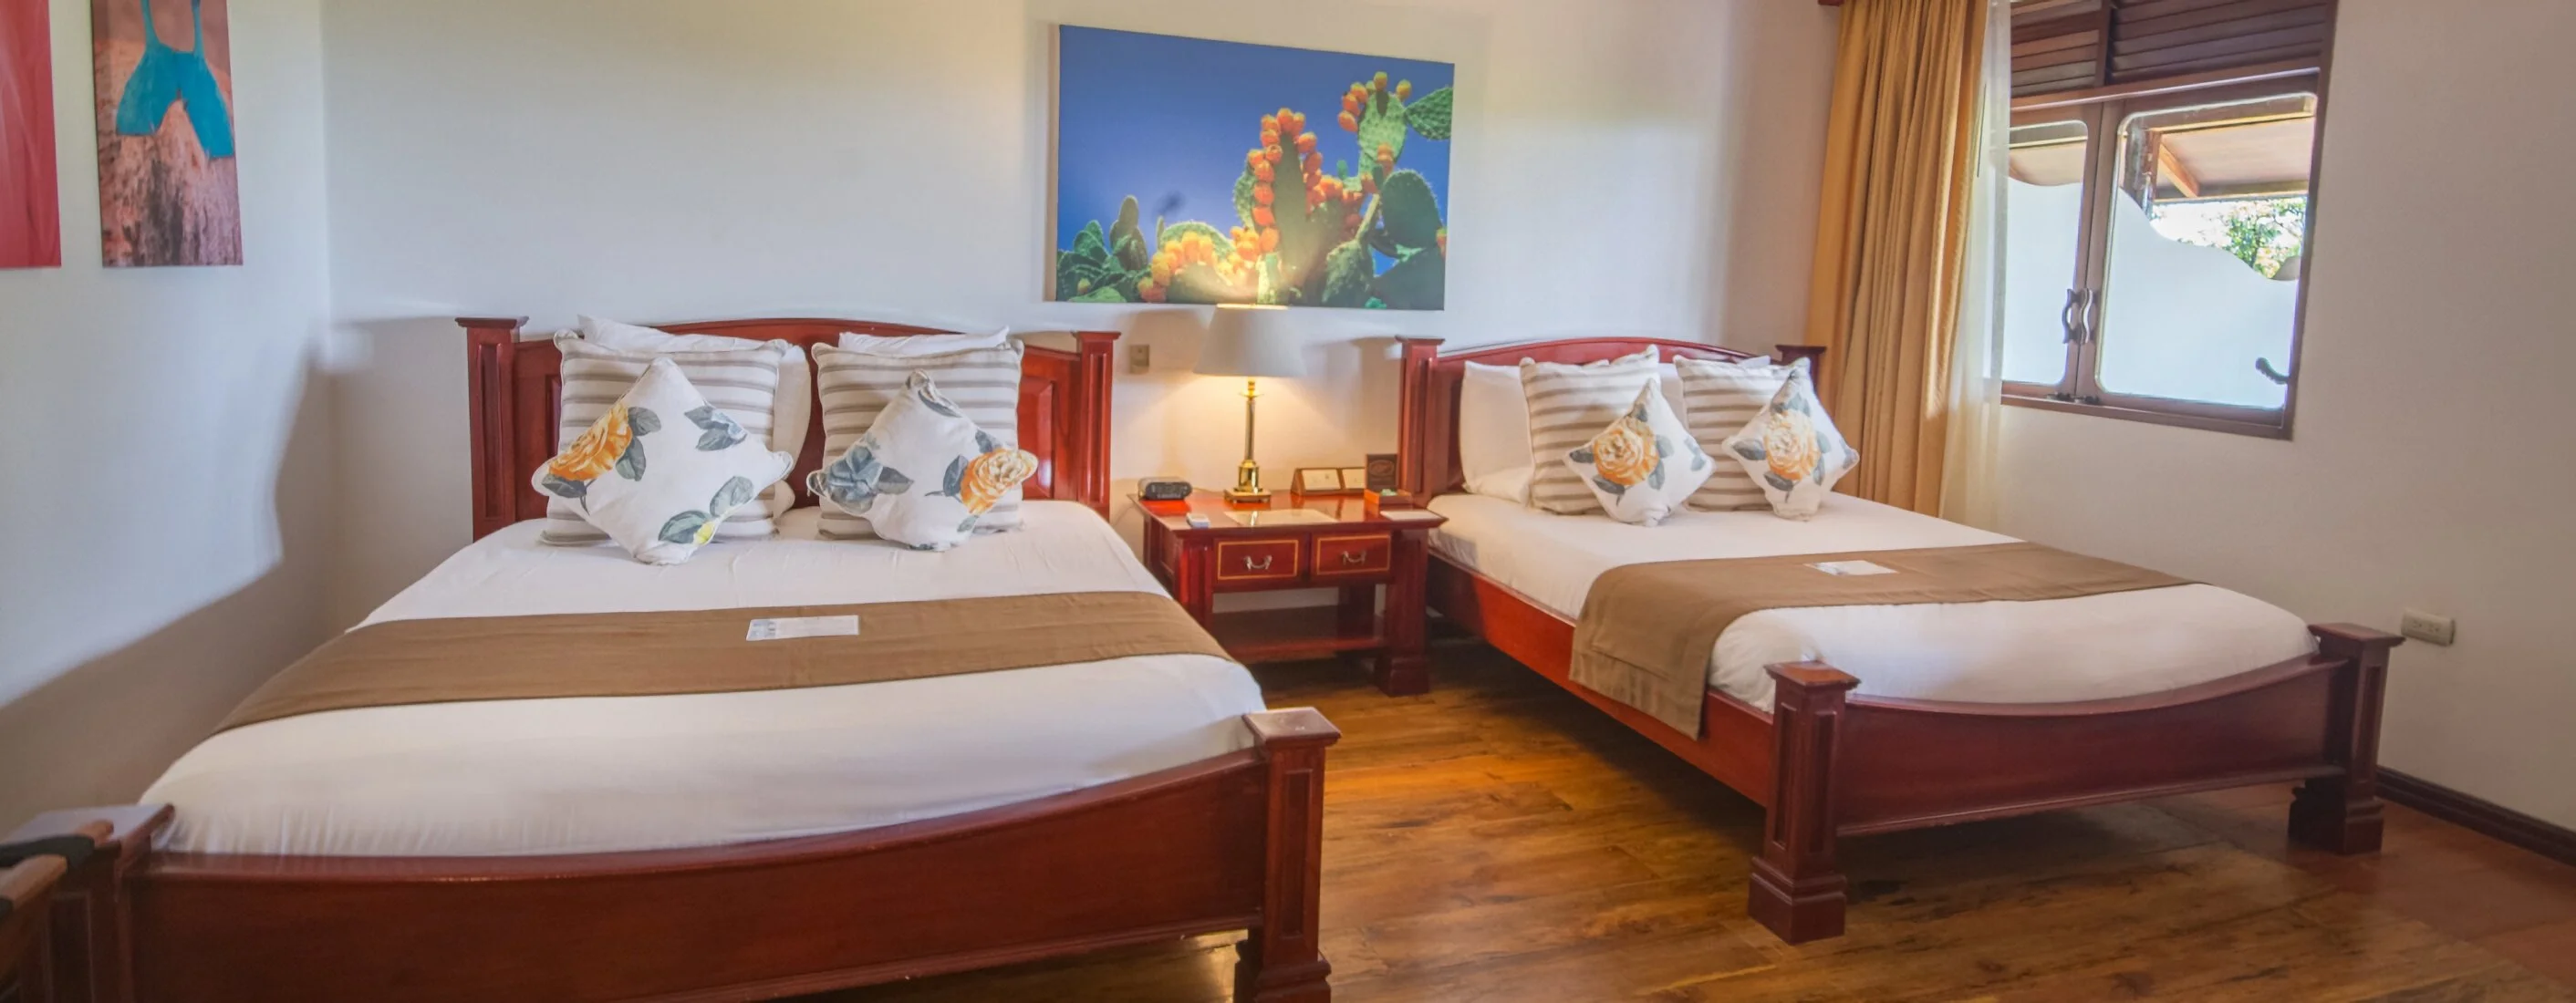 Hoteles-royal-palm-galapagos-curio-collection-hotel-by-hilton-13876